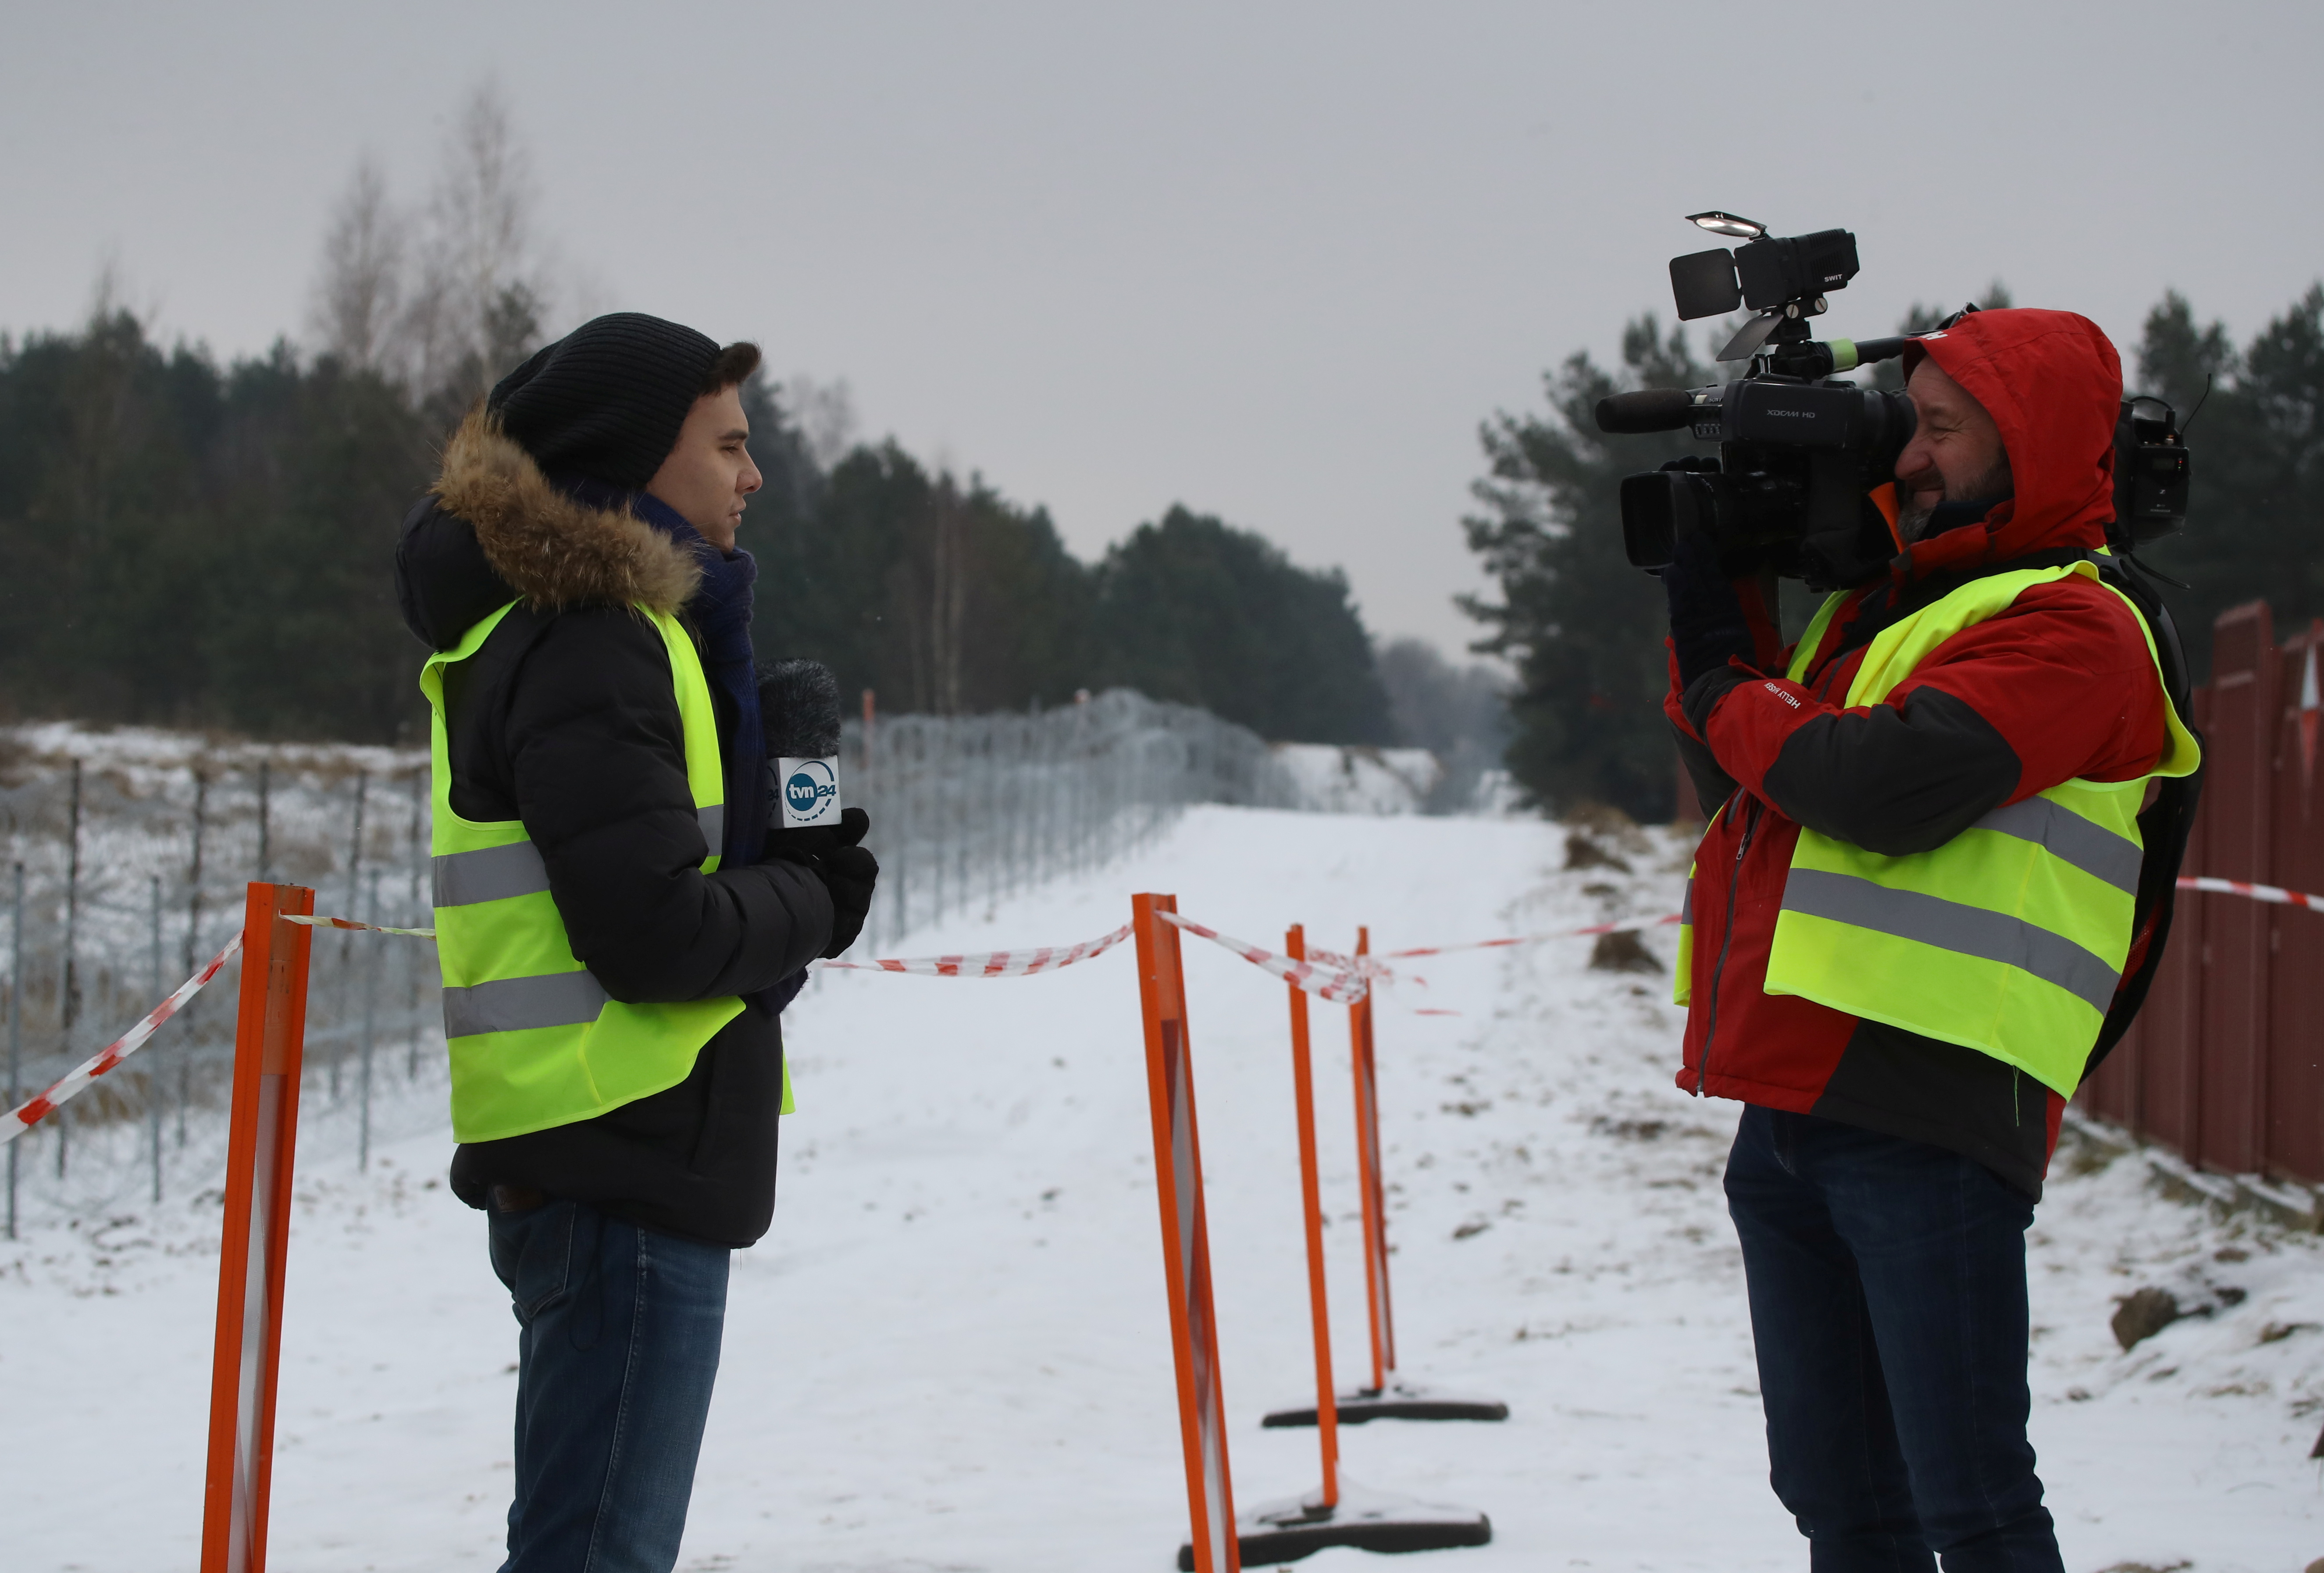 Journalists from TVN television record a live report after media representatives were allowed to be present in the border zone, at the Kuznica-Bruzgi checkpoint on the Polish-Belarusian border amid the migrant crisis, in Kuznica, Poland, December 6, 2021. REUTERS/Kacper Pempel